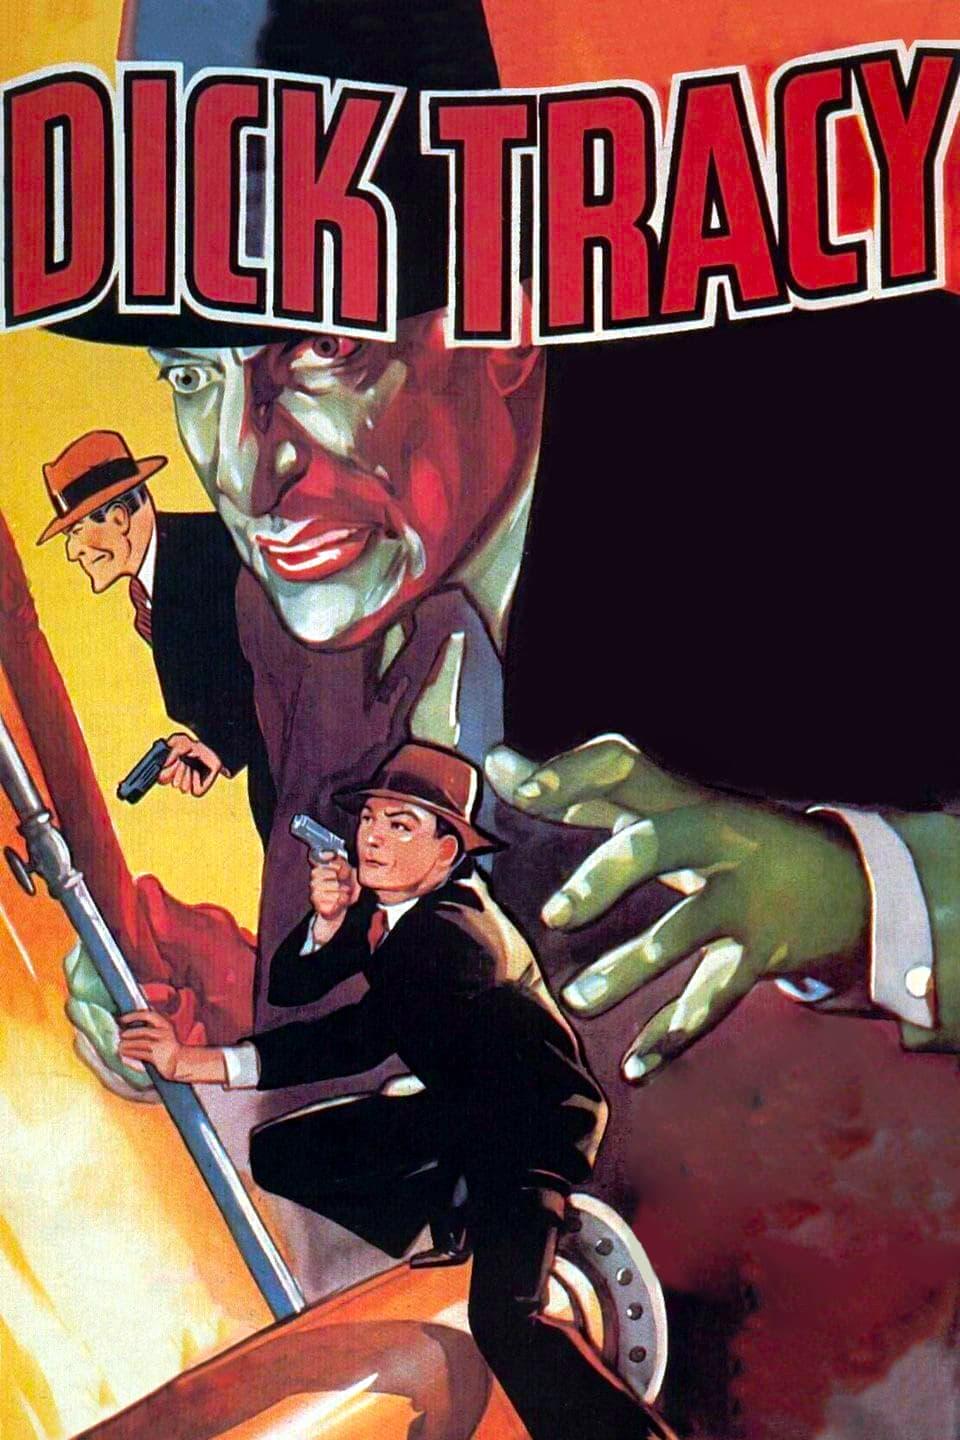 Dick Tracy poster